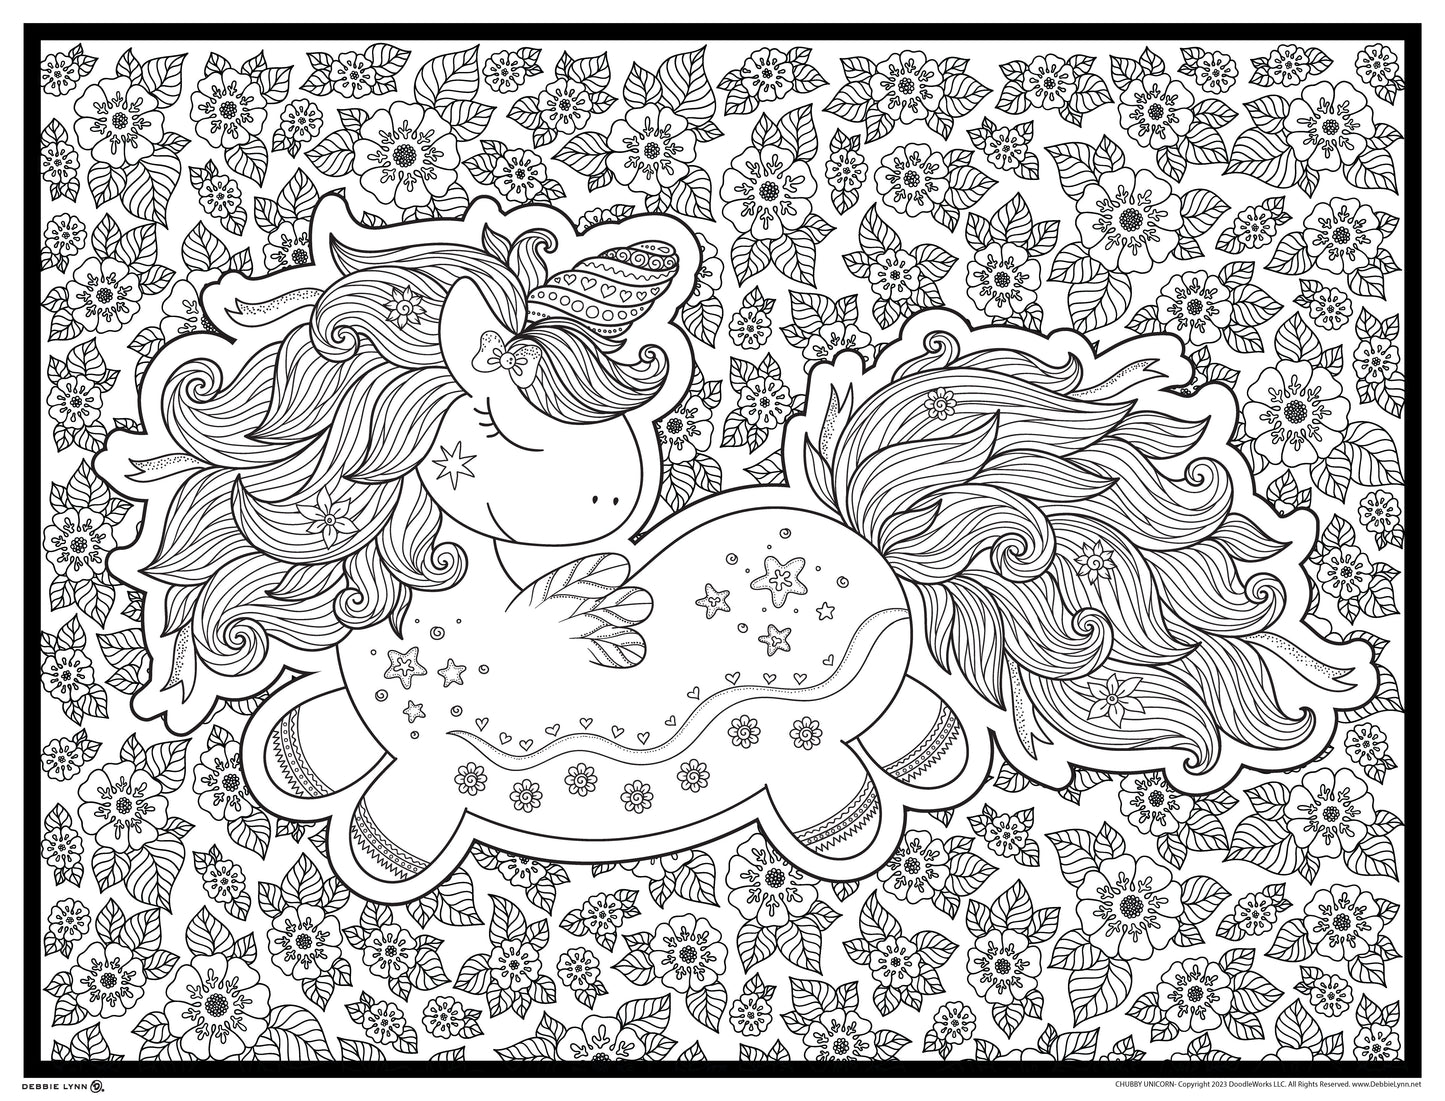 Chubby Unicorn Personalized Giant Coloring Poster 46"x60"